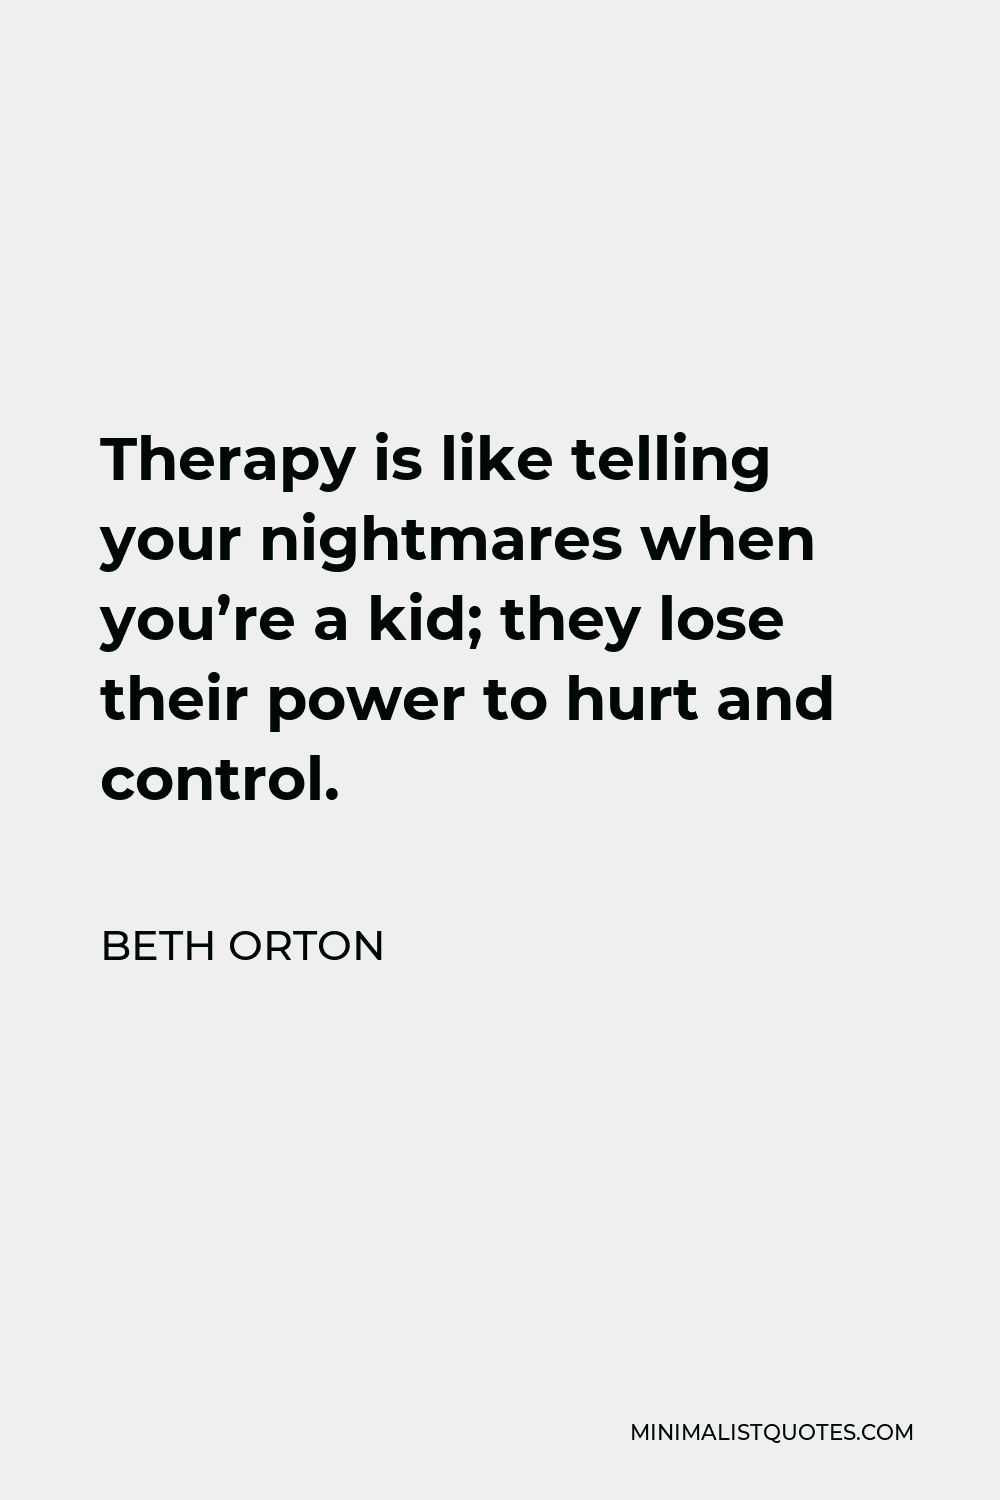 Beth Orton Quote - Therapy is like telling your nightmares when you’re a kid; they lose their power to hurt and control.